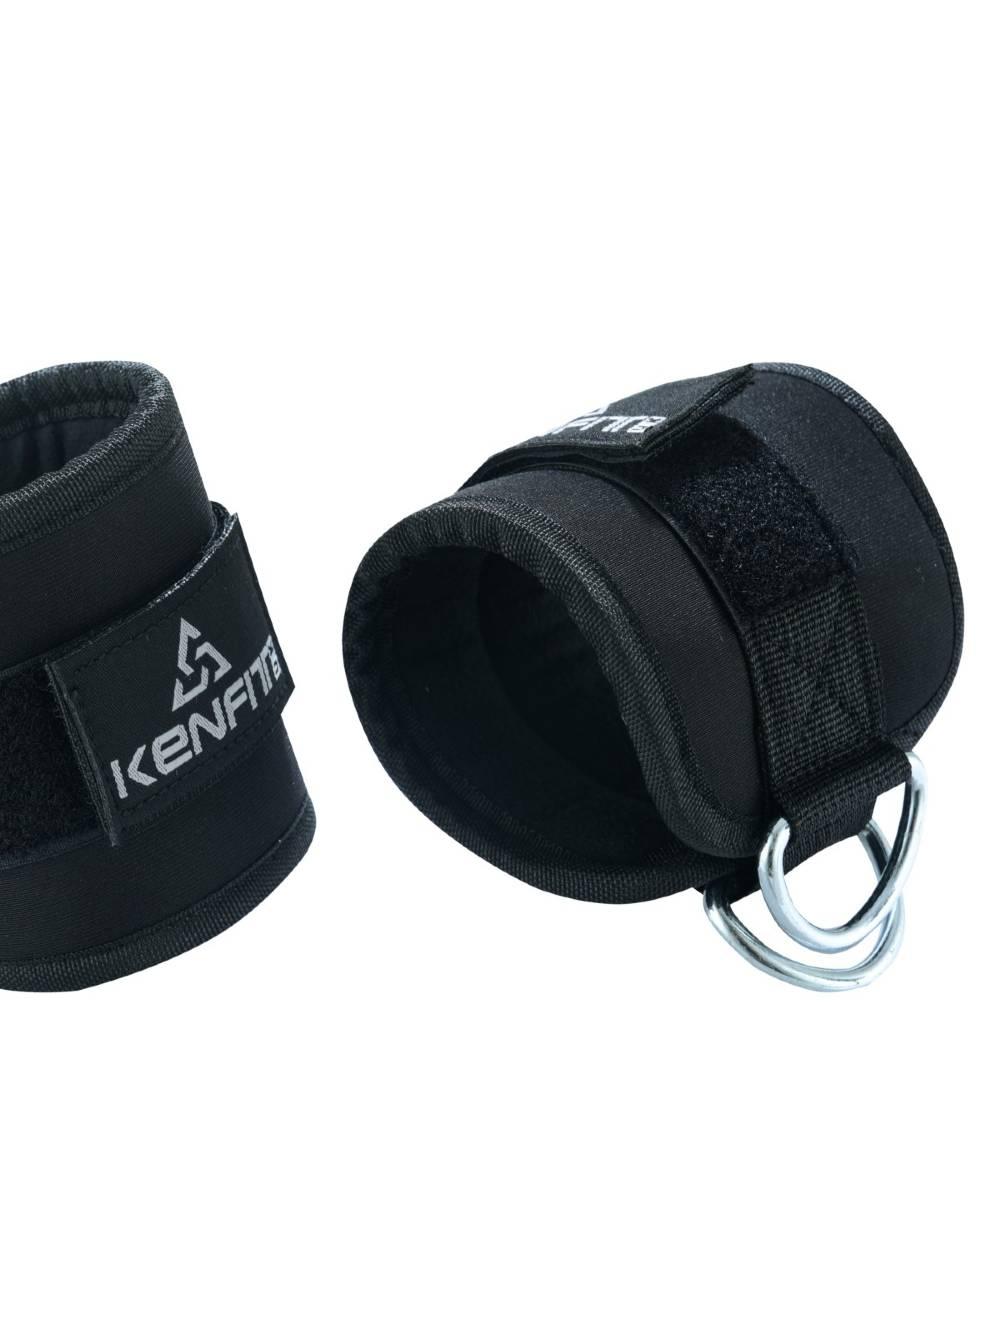 Padded Ankle Straps 10x4 inches strong D (SS)